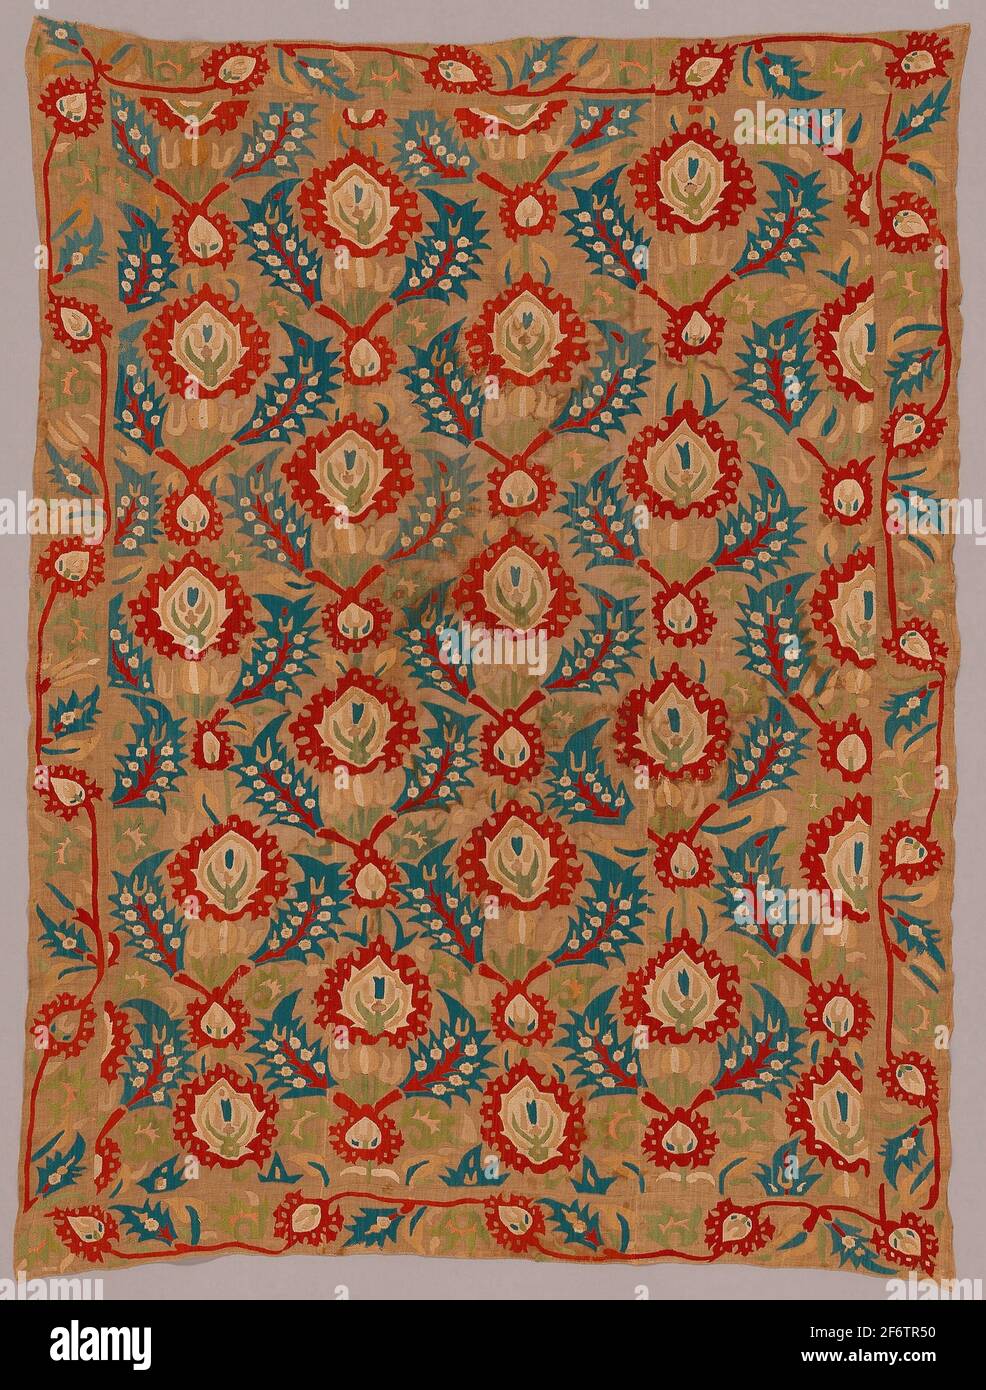 Cover-1675/1725-Turkey. embroidered linen. Three bands ogival motif and flowers, palmette border. 1675-1725. Stock Photo